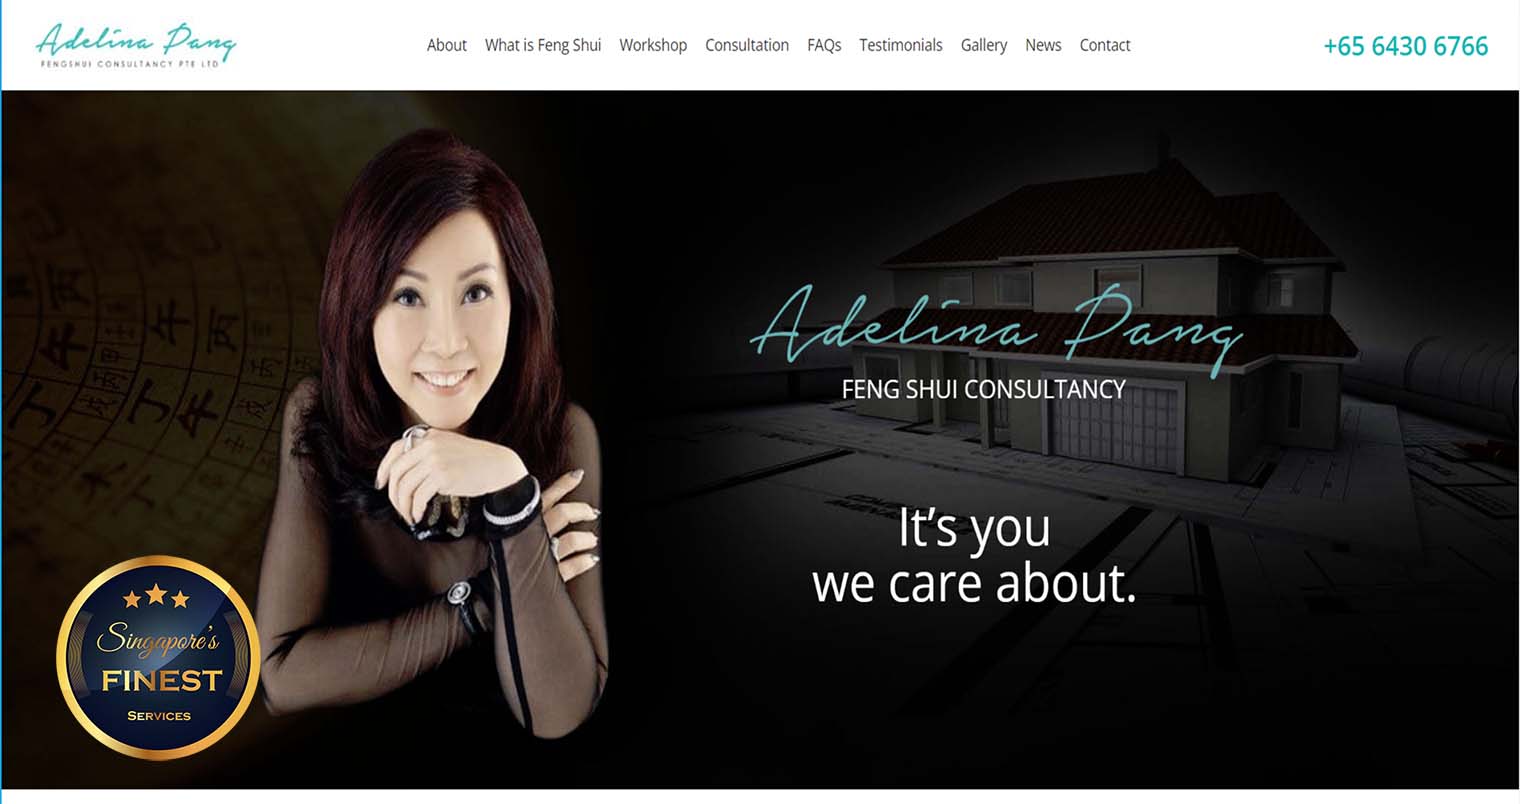 Adelina Pang Fengshui Consultancy - Fengshui Master Singapore